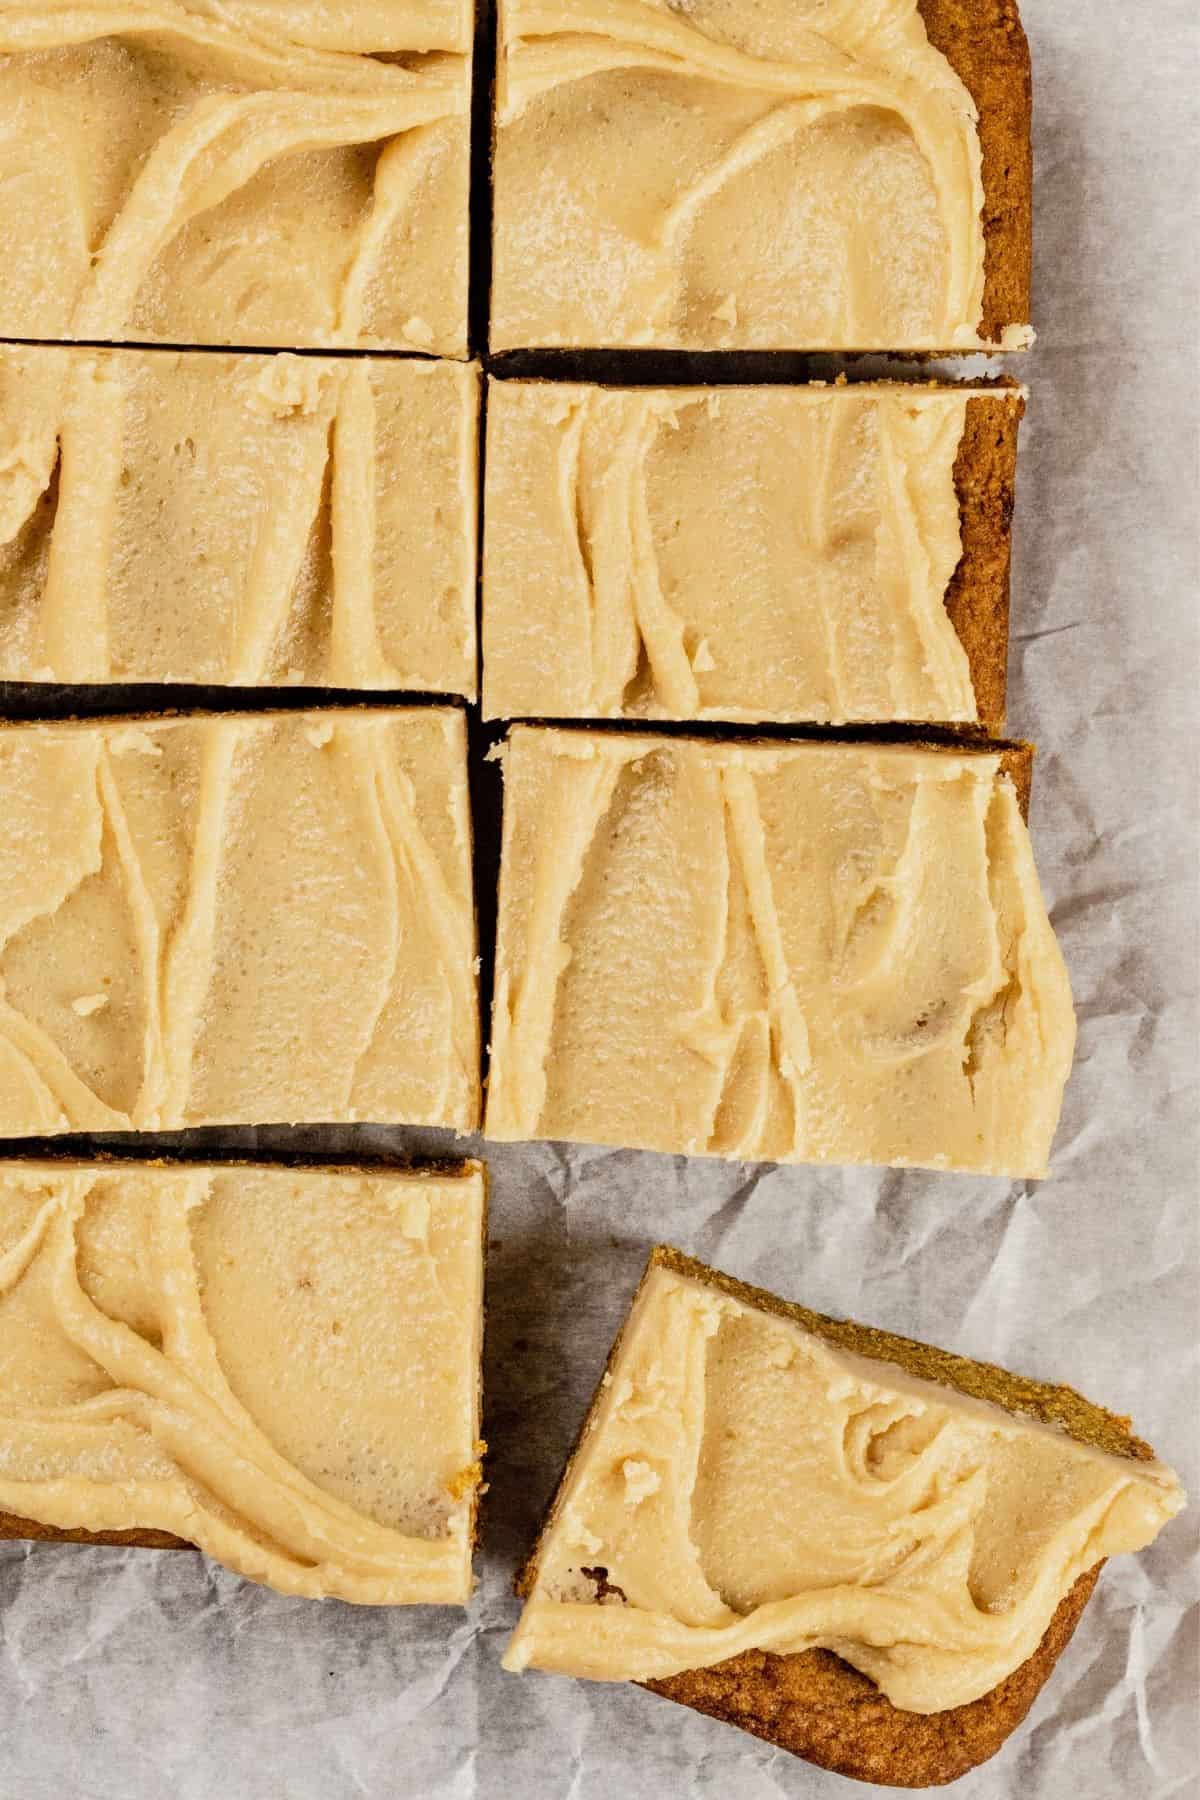 looking down at many slices of pumpkin bars on crinkled white parchment paper. a corner piece is breaking away from the rest of the group.